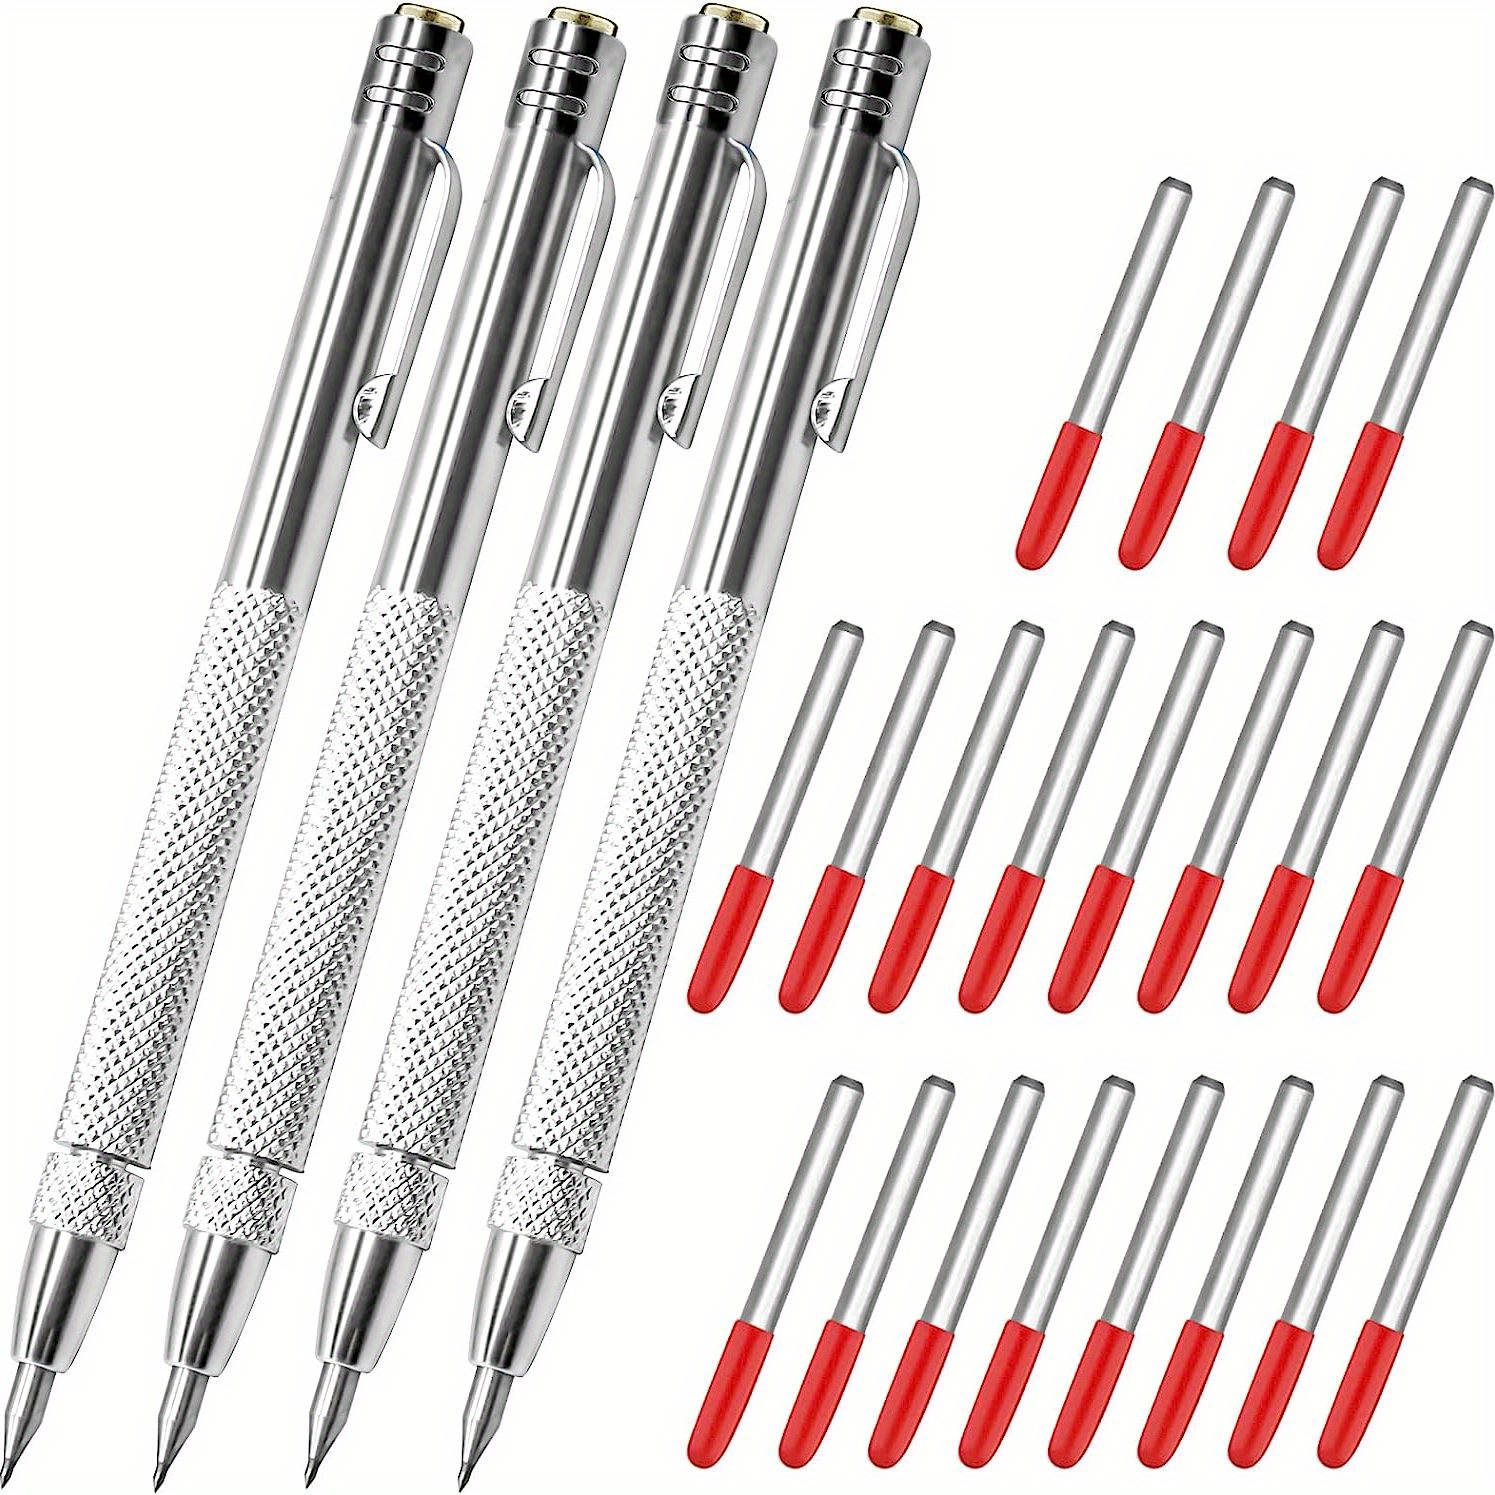 4 Pcs Tungsten Carbide Scribe Etching Engraving Pen Carve Engraver Scriber Tools for Stainless Steel Ceramics and Glass, Size: 1